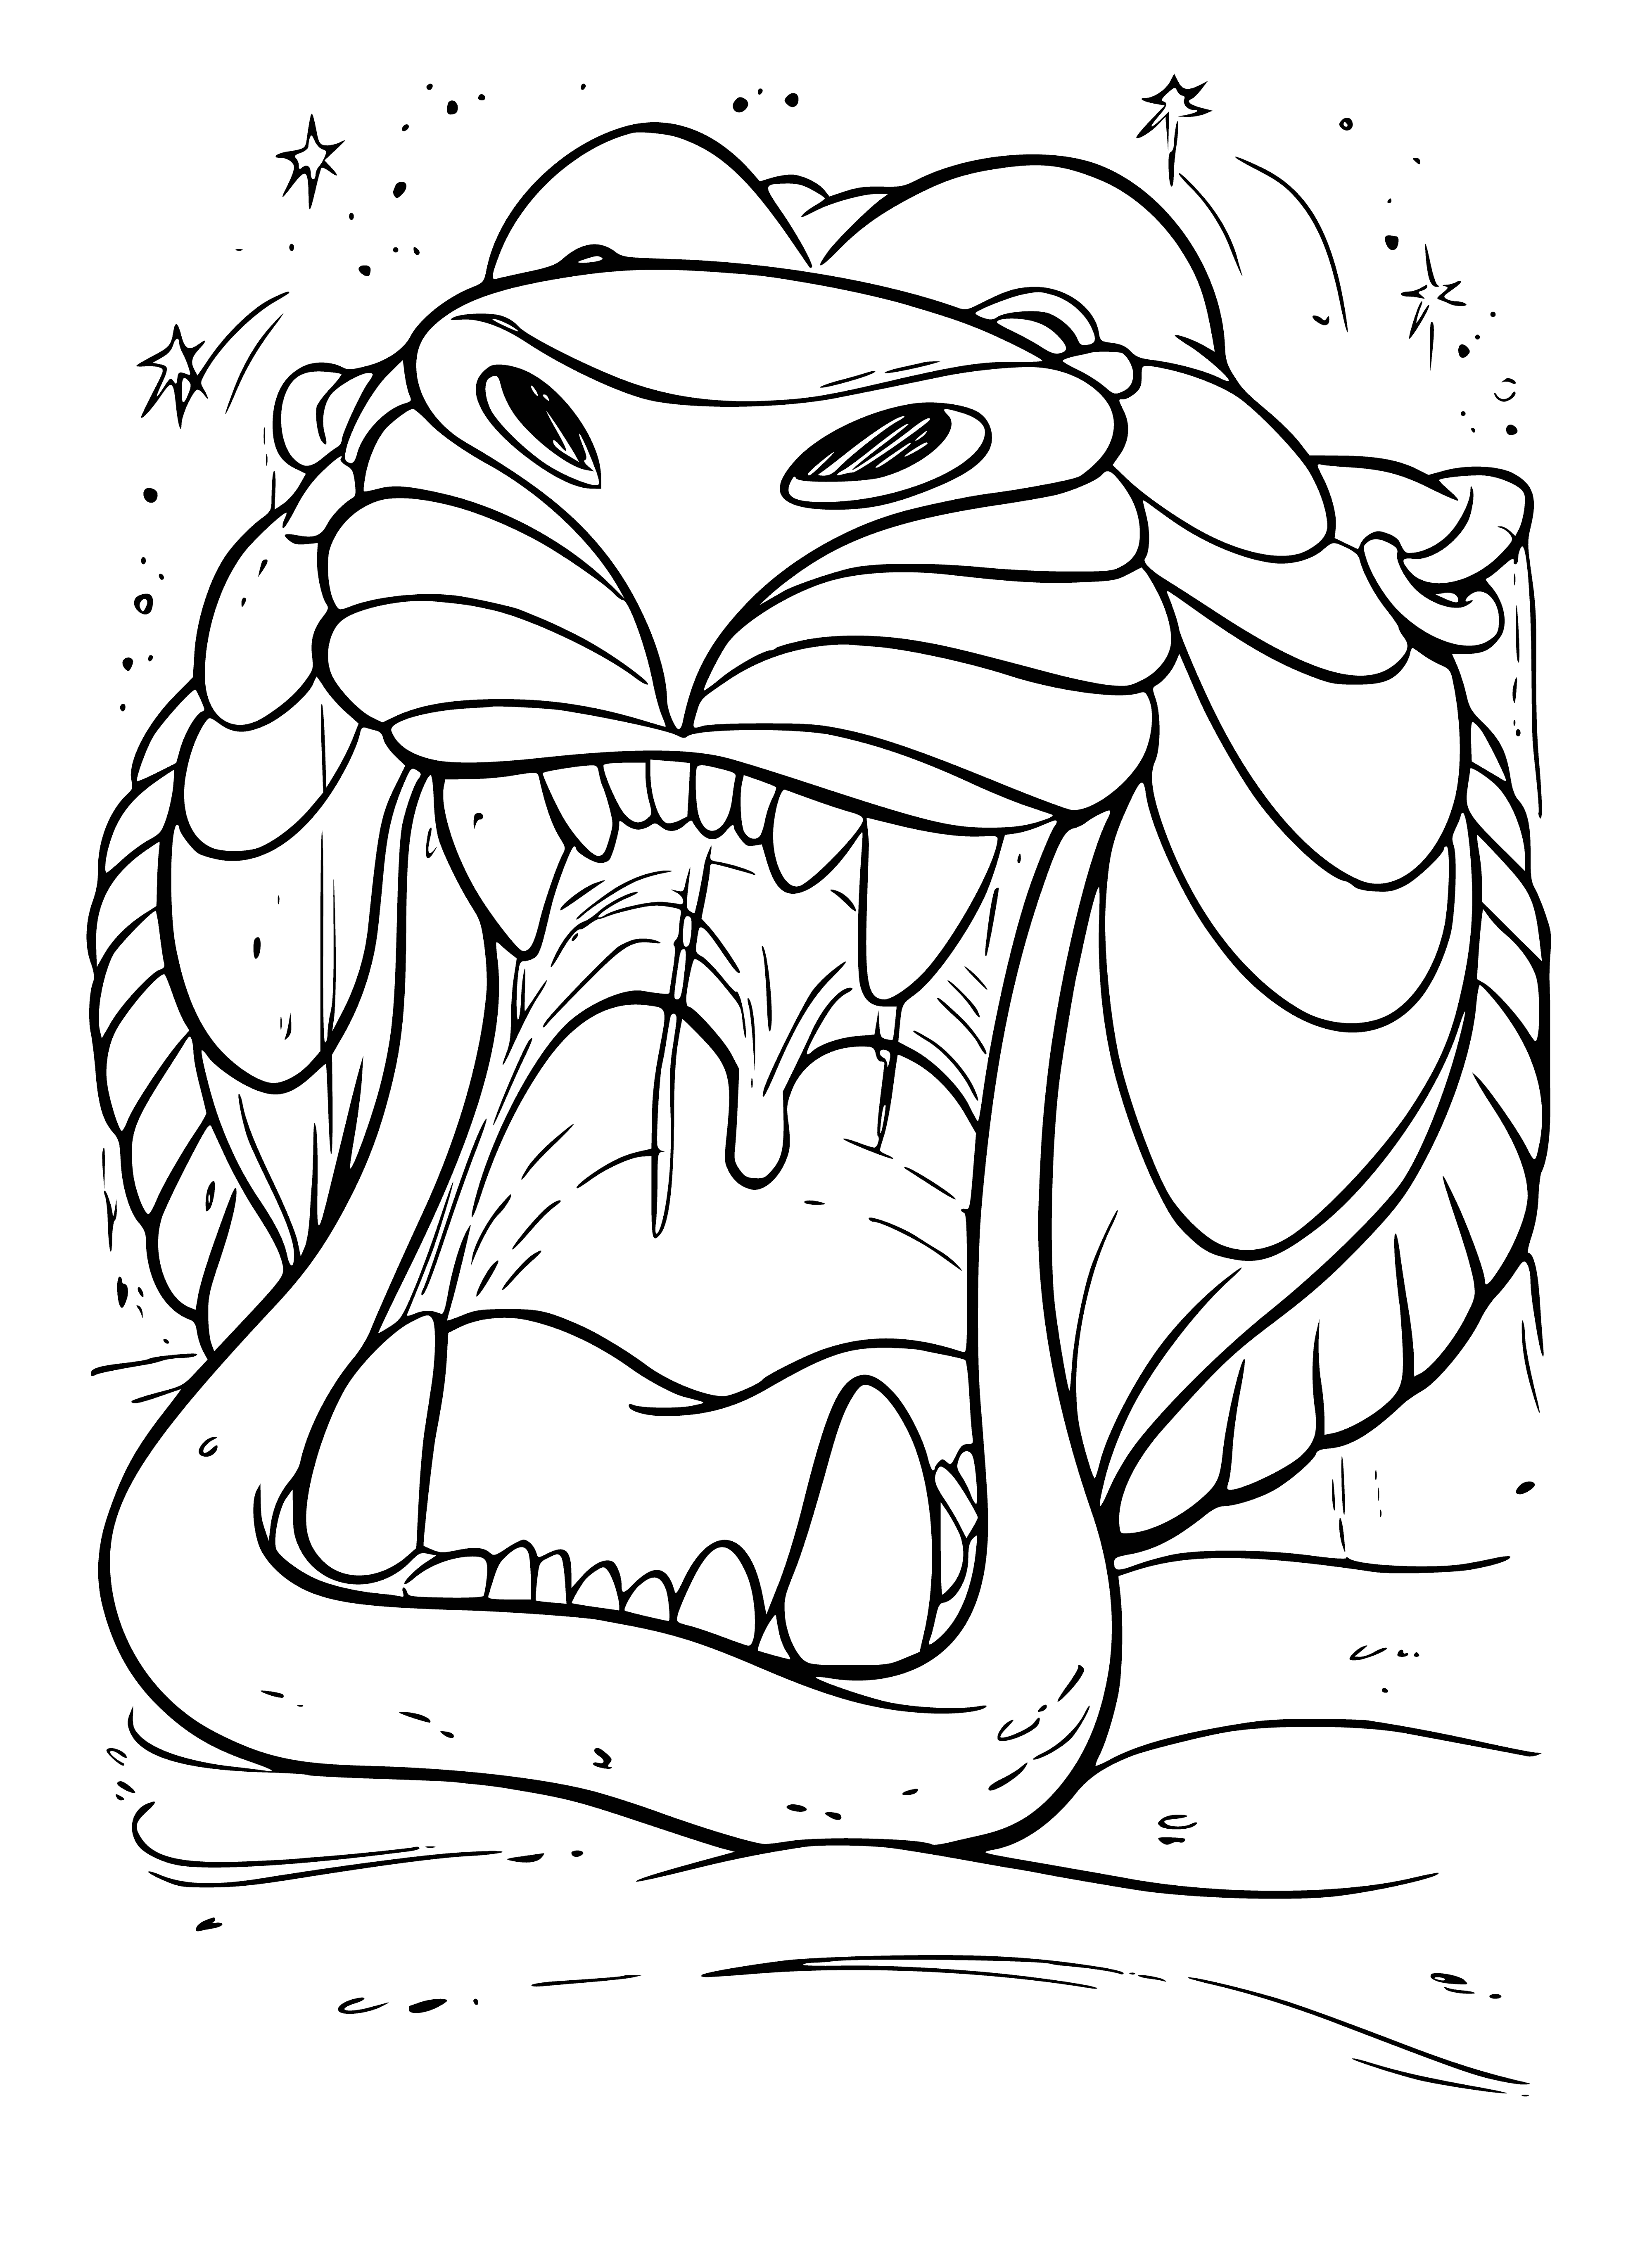 coloring page: Aladdin must choose between a snake & Genie in a Magic Cave to get the lamp, but one wrong choice could lead to disaster. #Aladdin #Genie #MagicCave